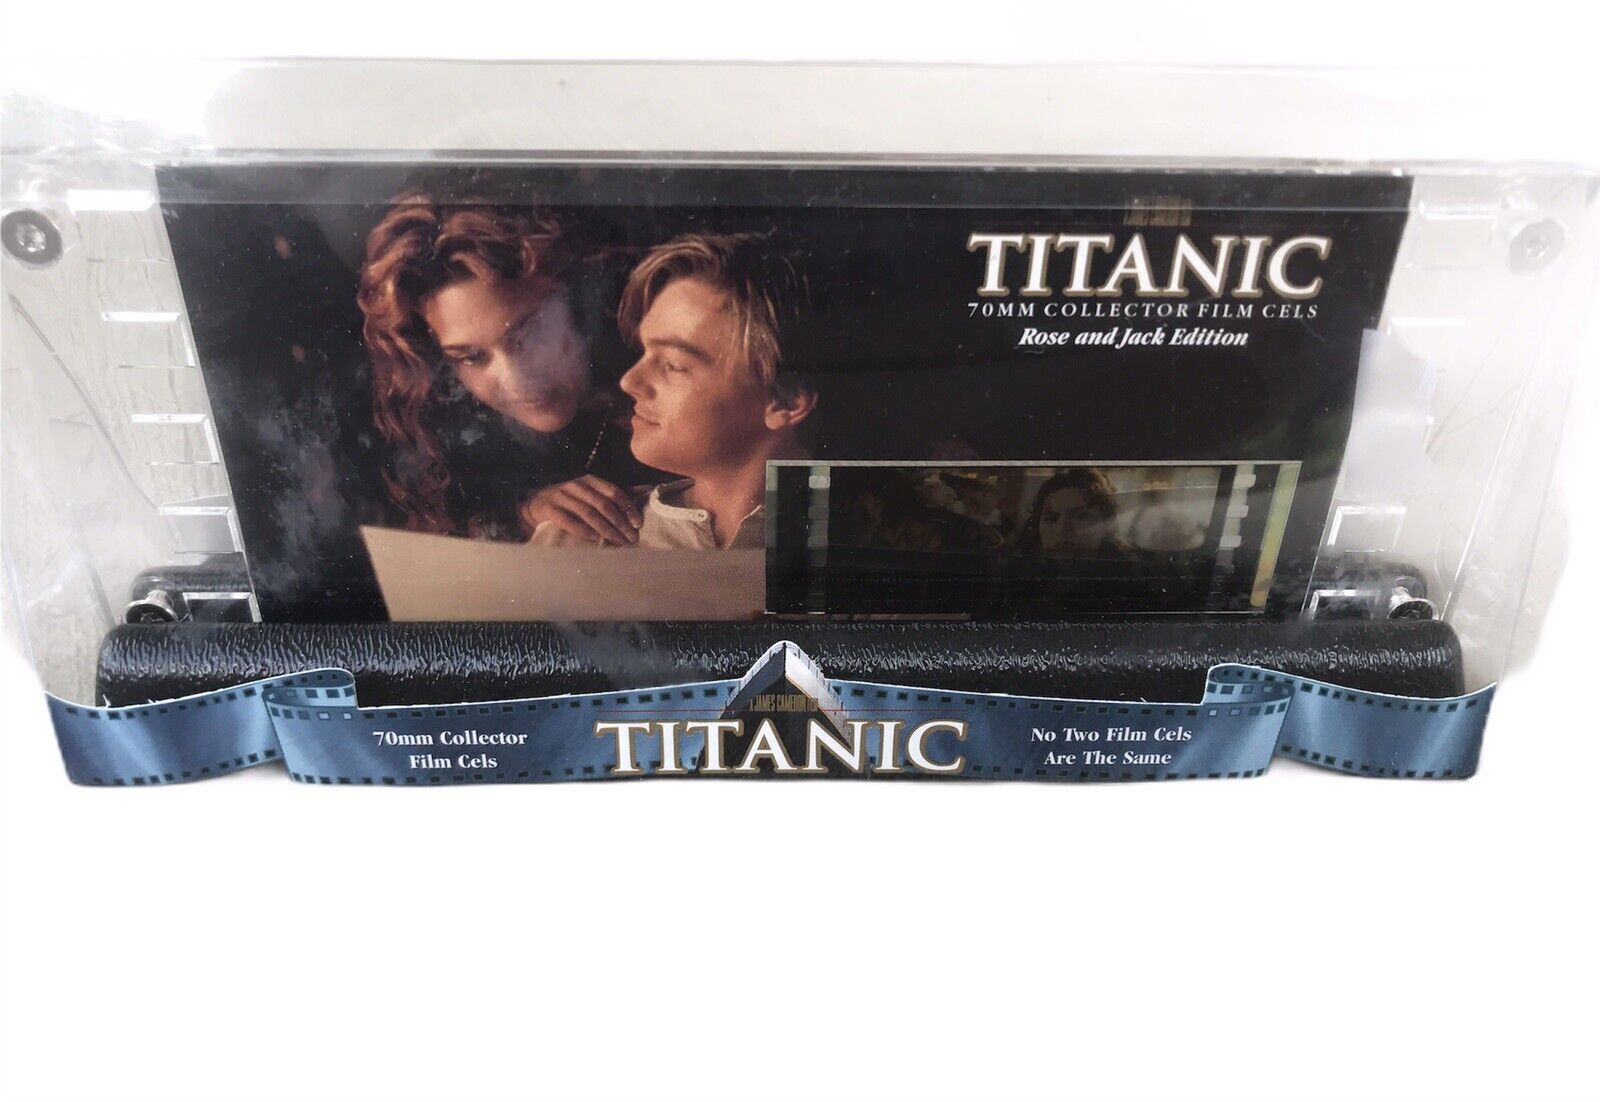 Titanic 70mm Collector Film Cels Set Of 2 - Rose And Jack Edition- No 2 The Same